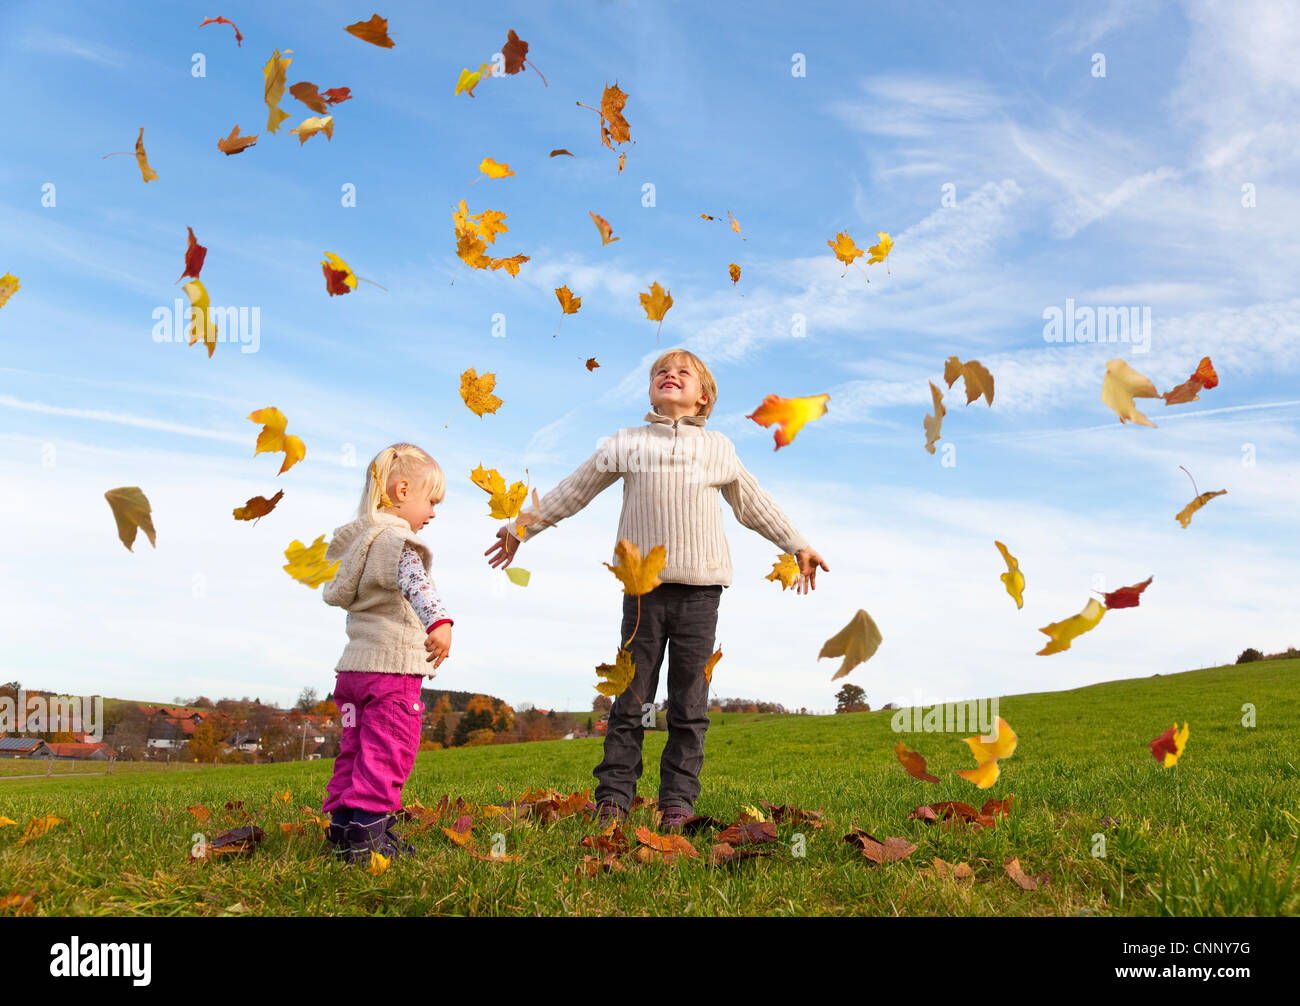 Children playing in fall leaves Stock Photo